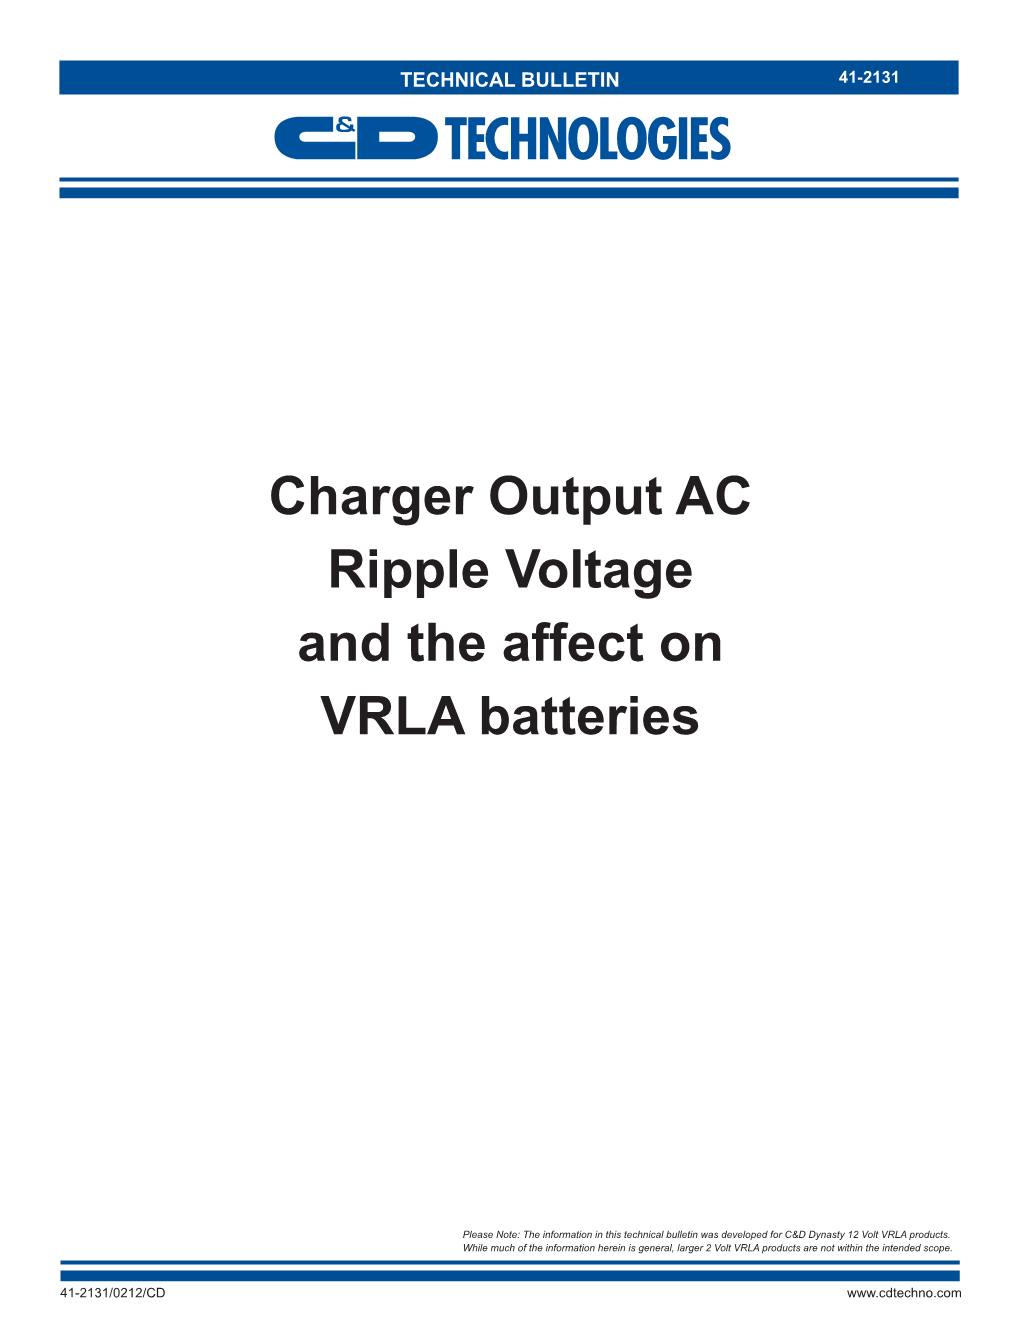 Charger Output AC Ripple Voltage and the Affect on VRLA Batteries